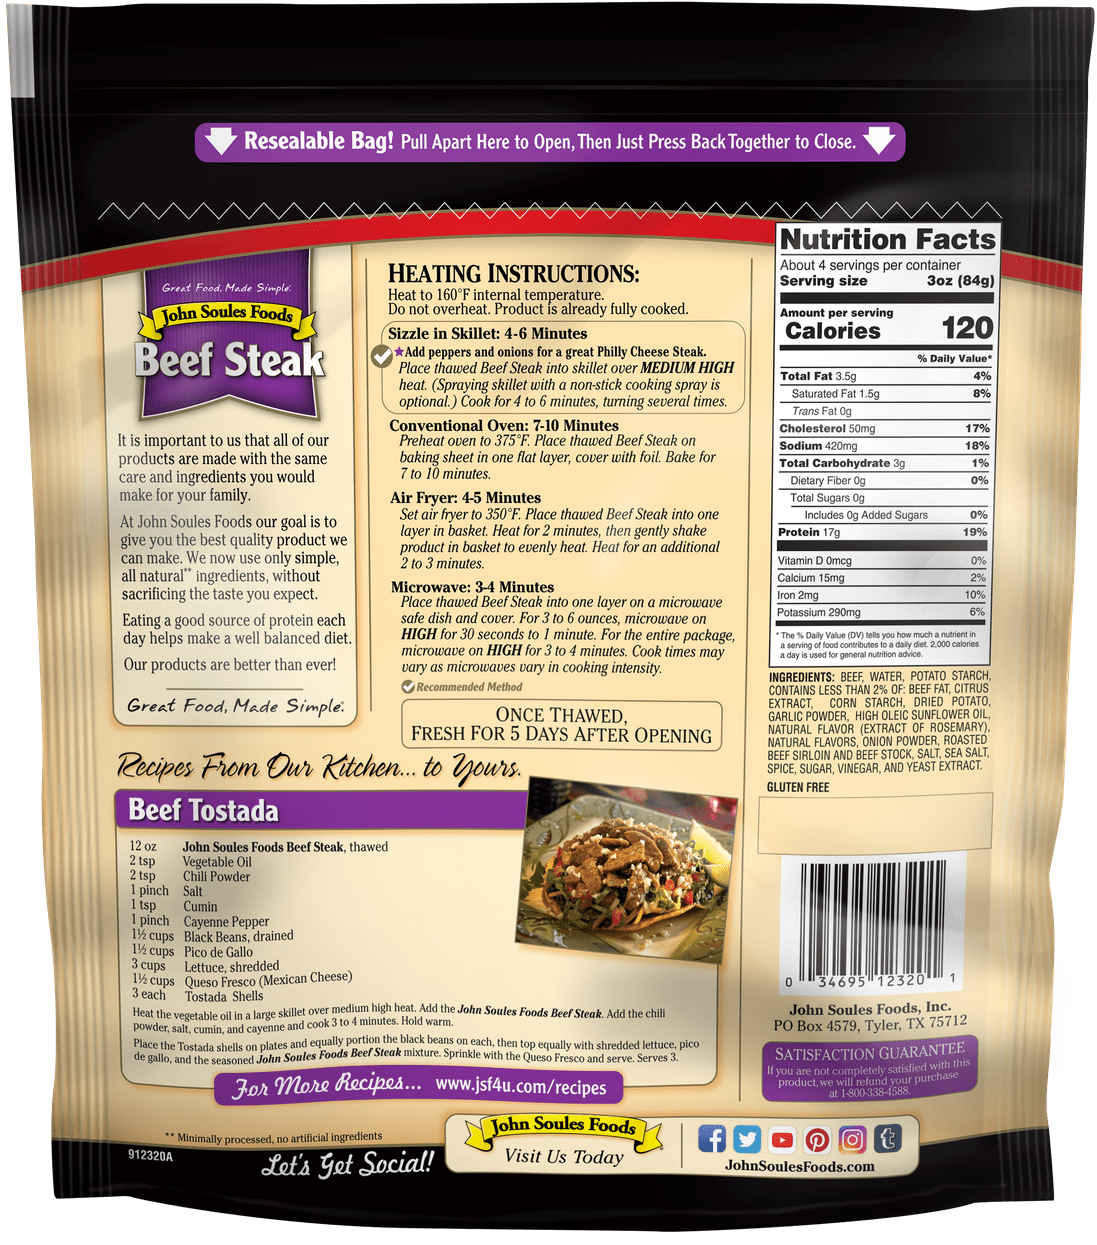 John Soules Foods Beef Steak Instructions and Nutrition Facts